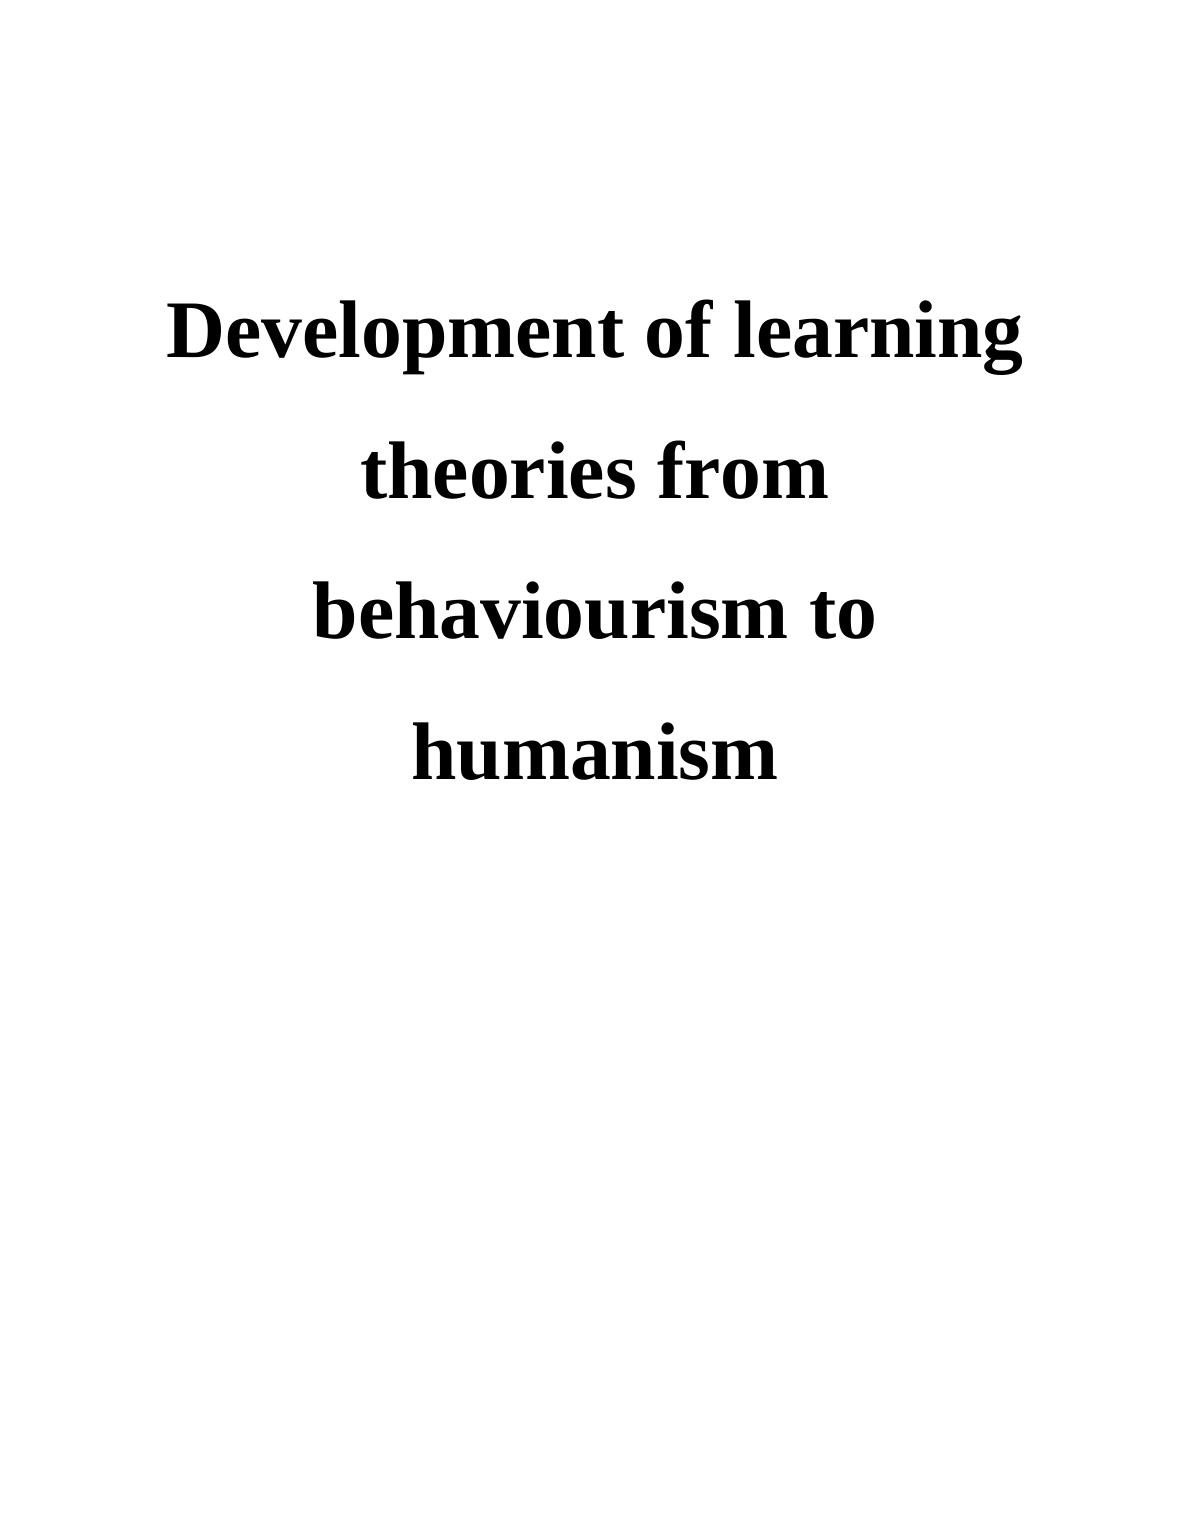 Development of Learning Theories From Behaviourism to Humanism - Essay_1